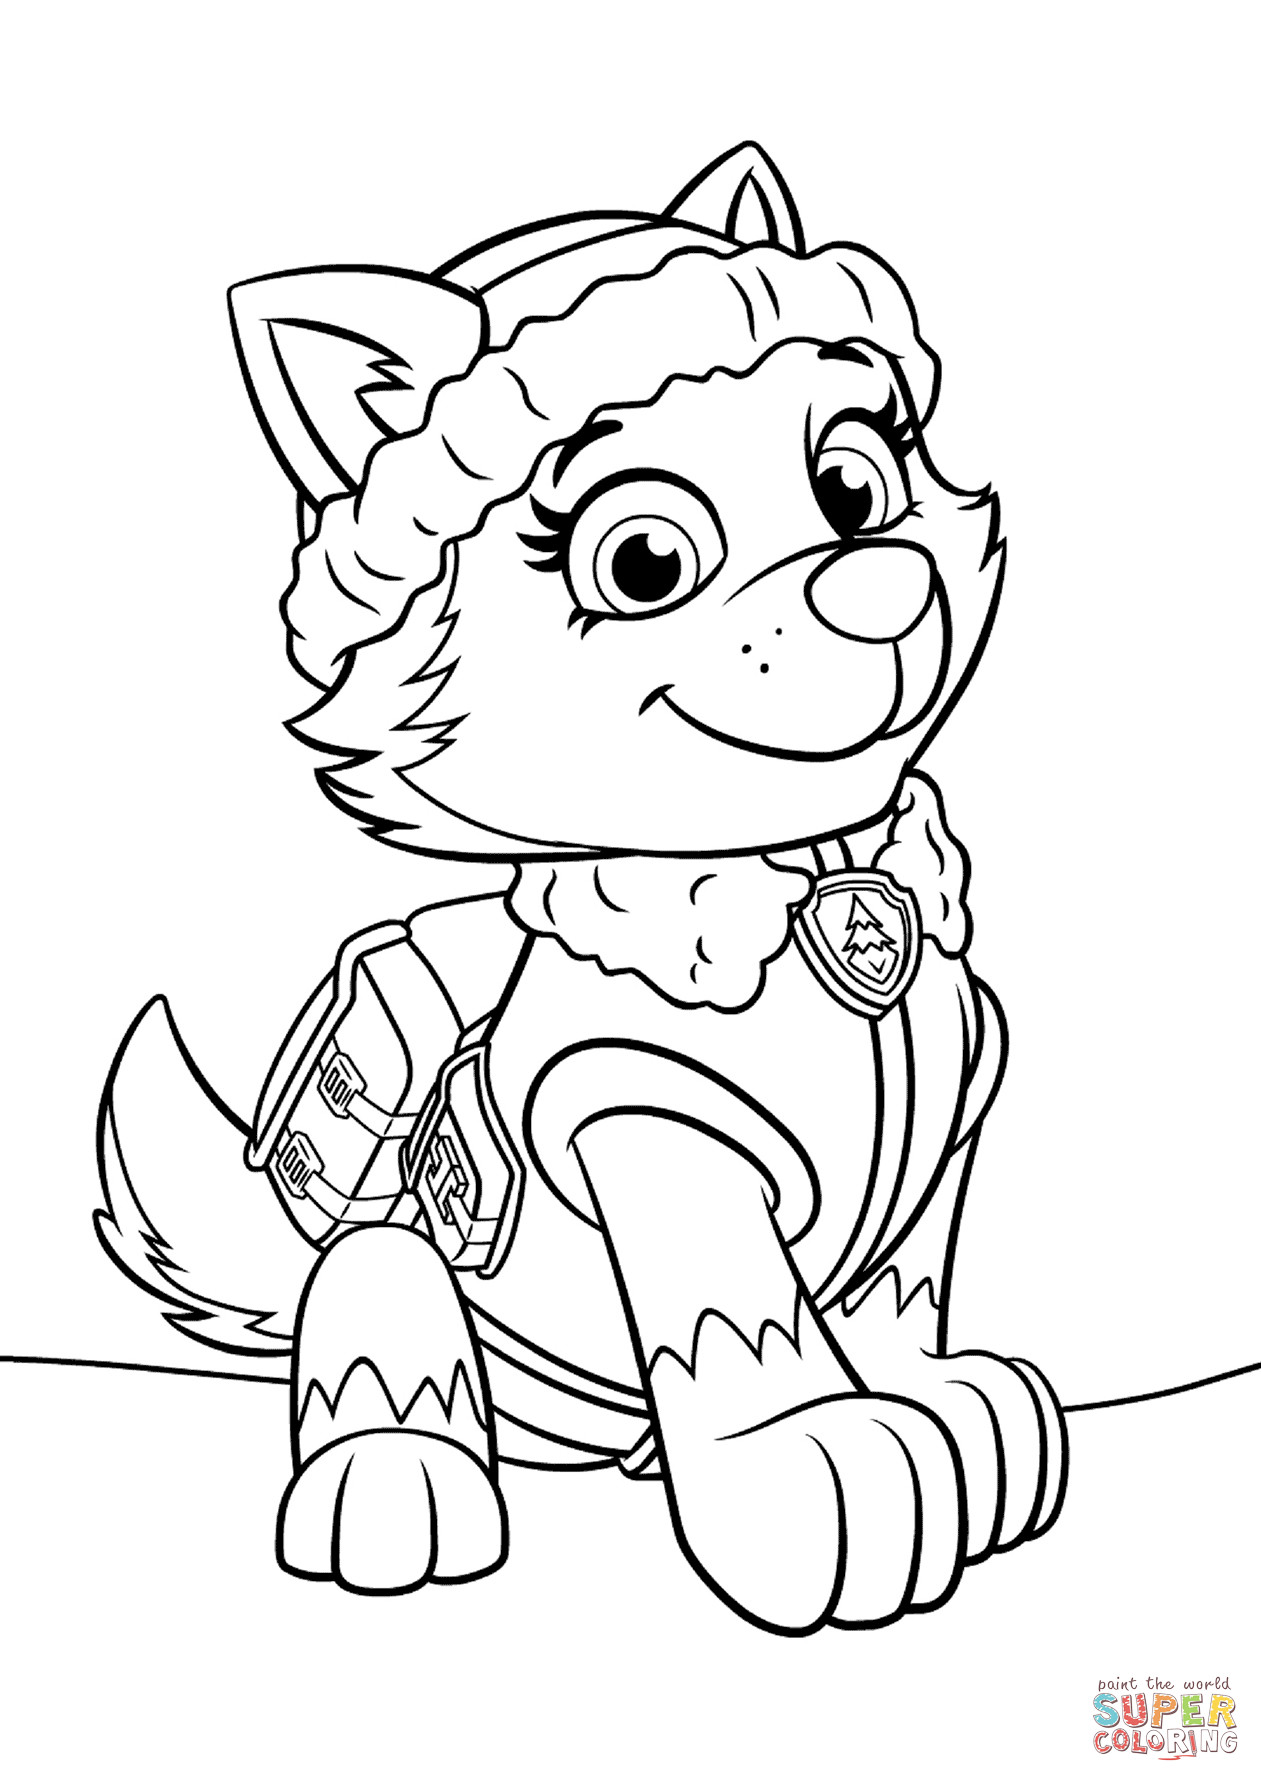 Paw Patrol Printable Coloring Sheets
 Paw Patrol Everest coloring page